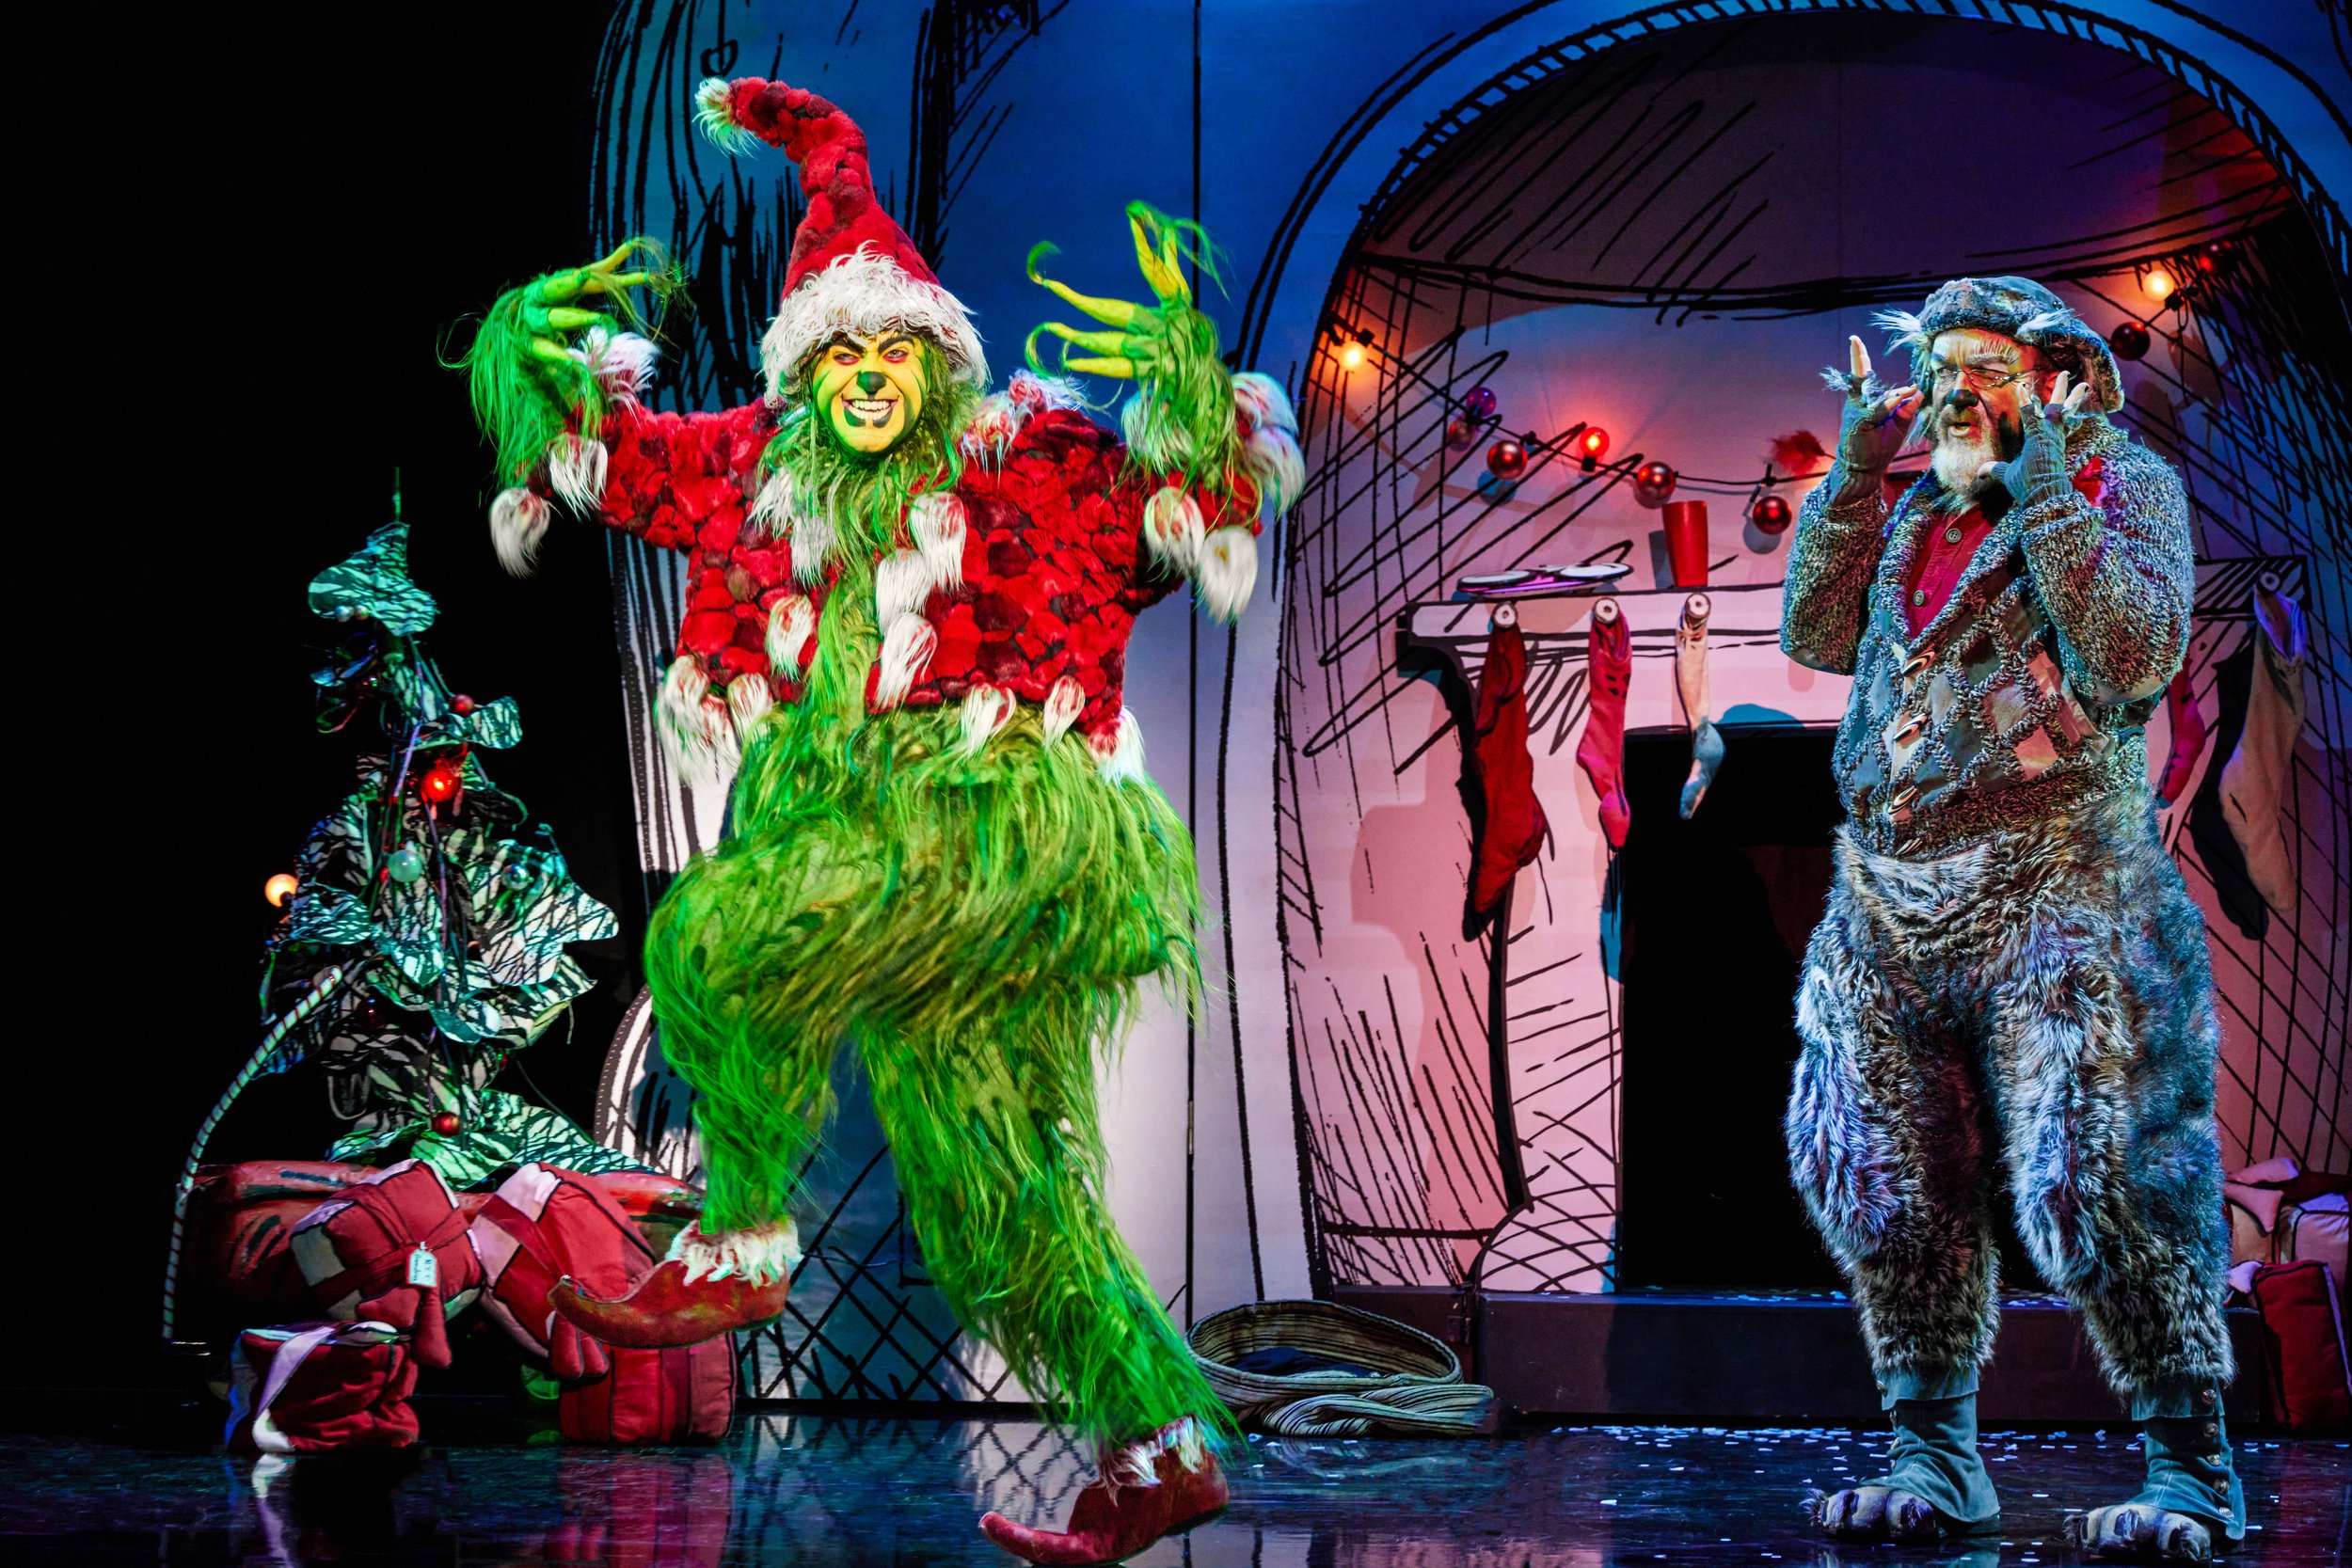 How the grinch stole christmas the musical in San jose